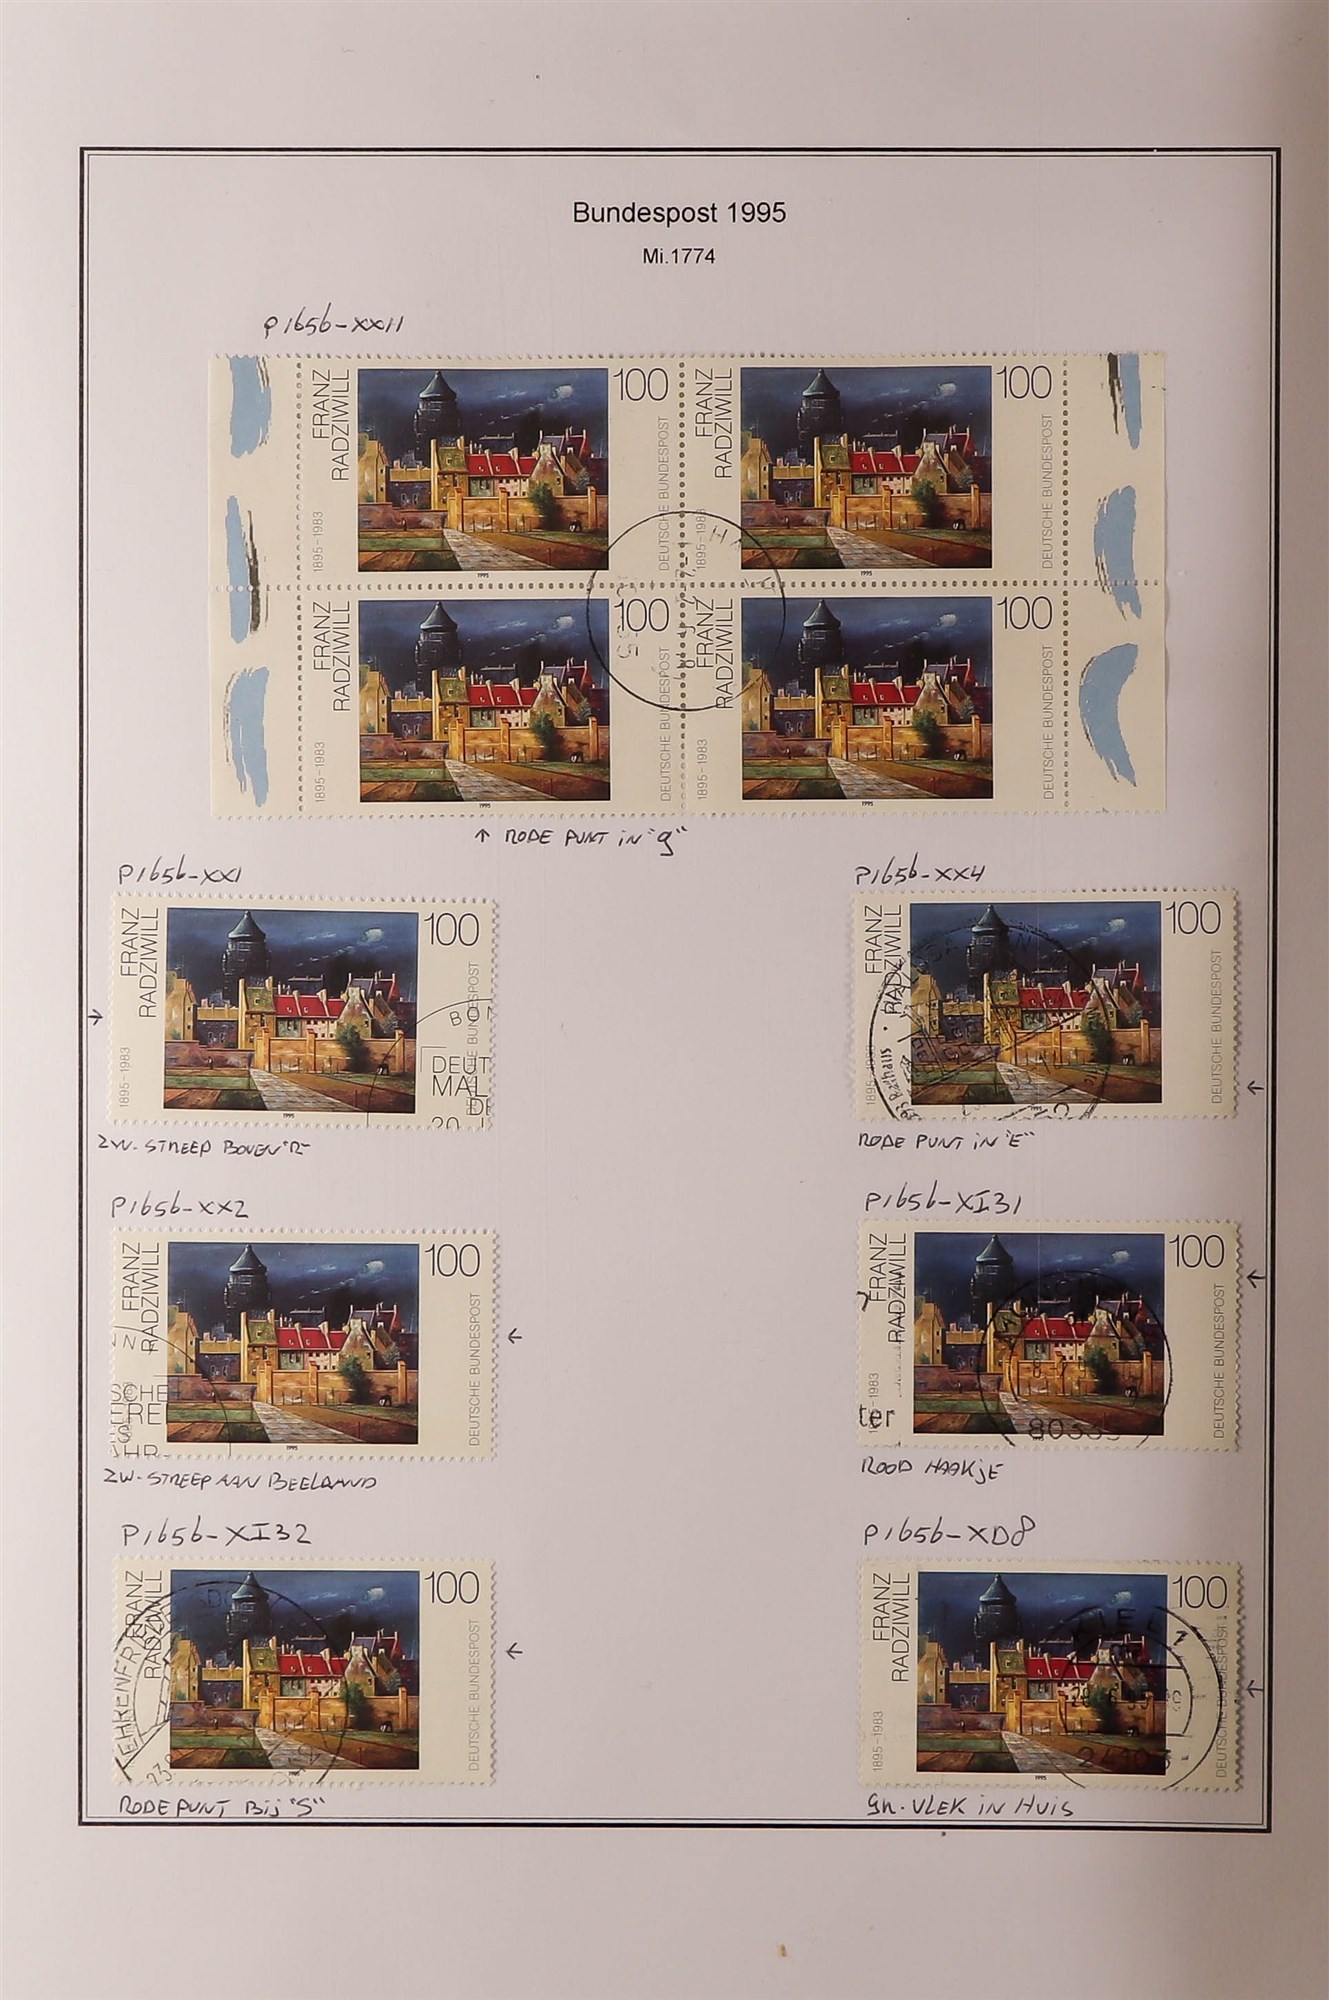 GERMANY WEST 1996 - 1999 SPECIALIZED COLLECTION of over 2000 mint, never hinged mint and used - Image 30 of 35